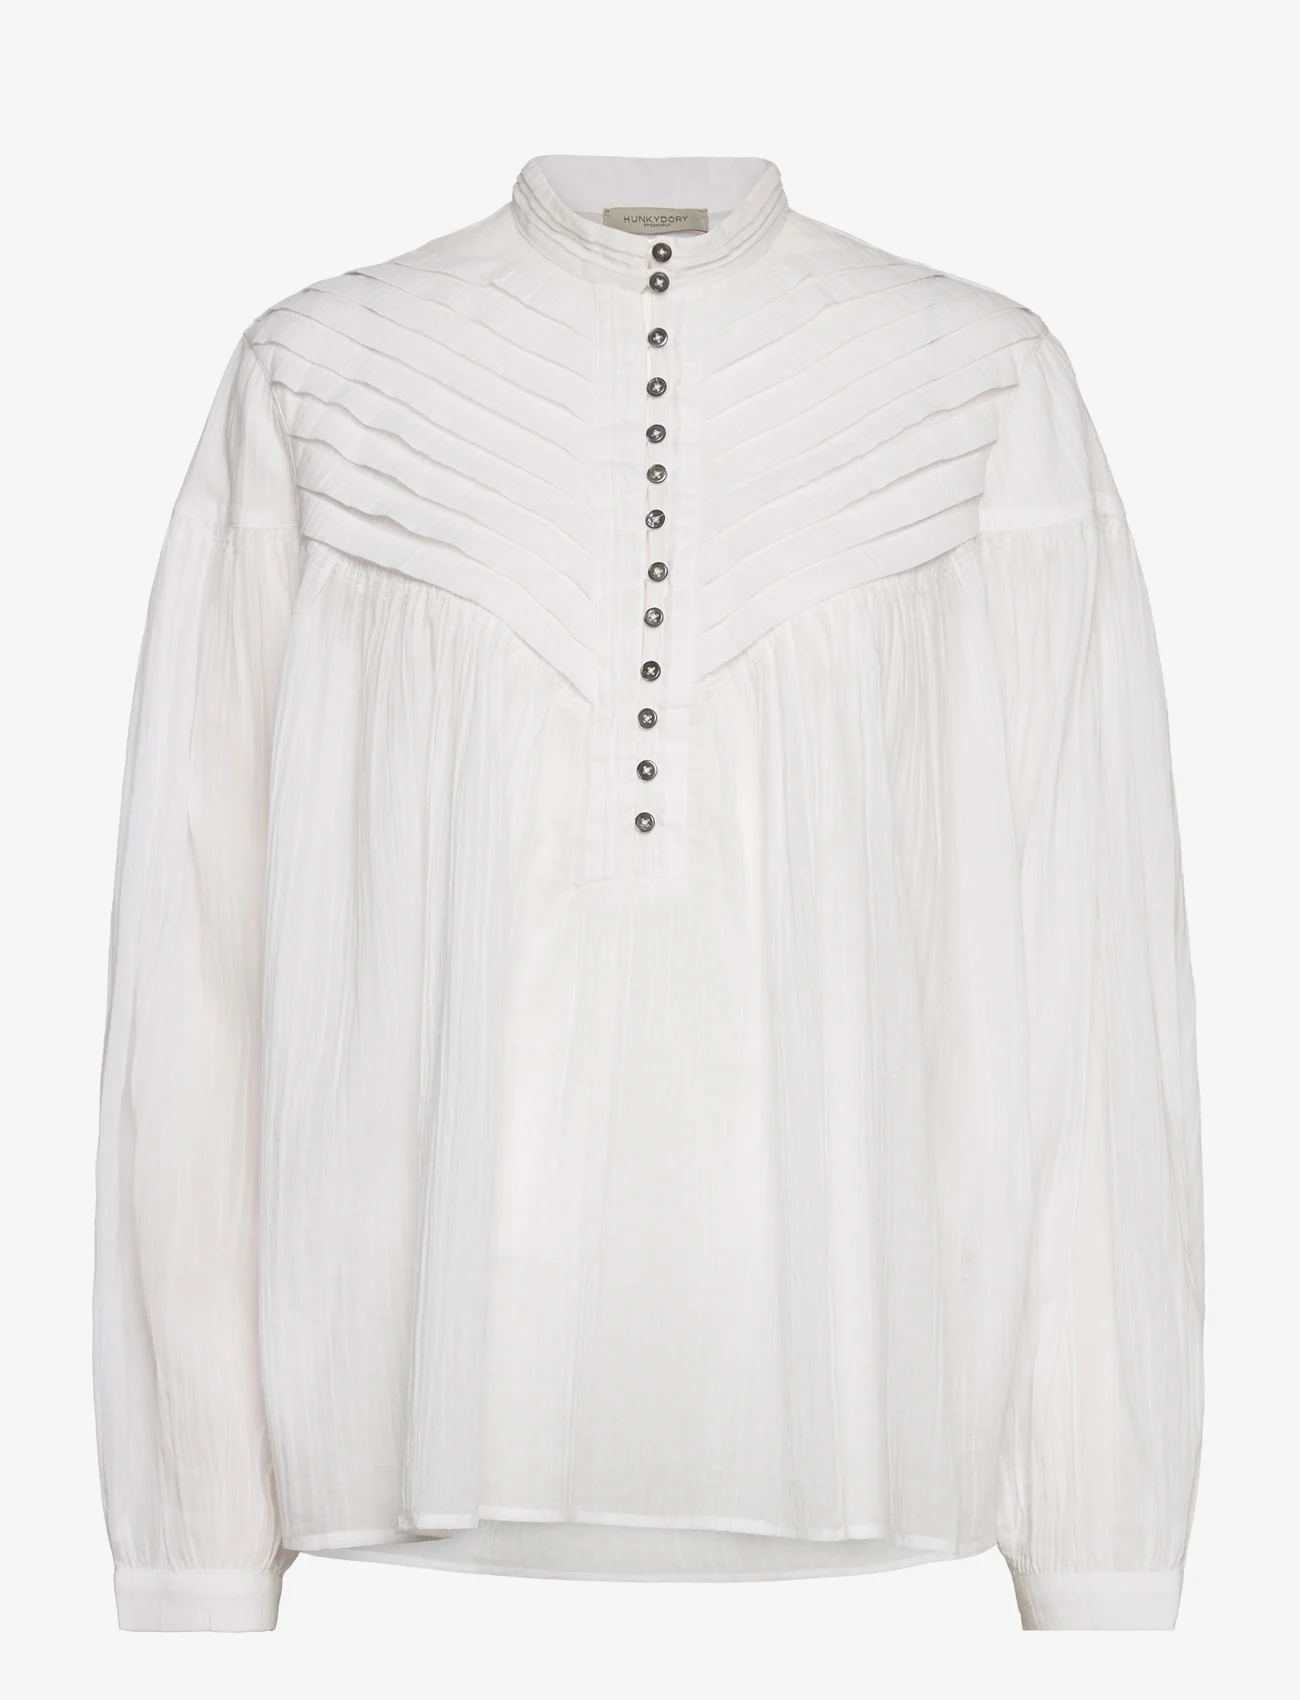 HUNKYDORY - Etty Blouse - long-sleeved blouses - frosty chalk - 0